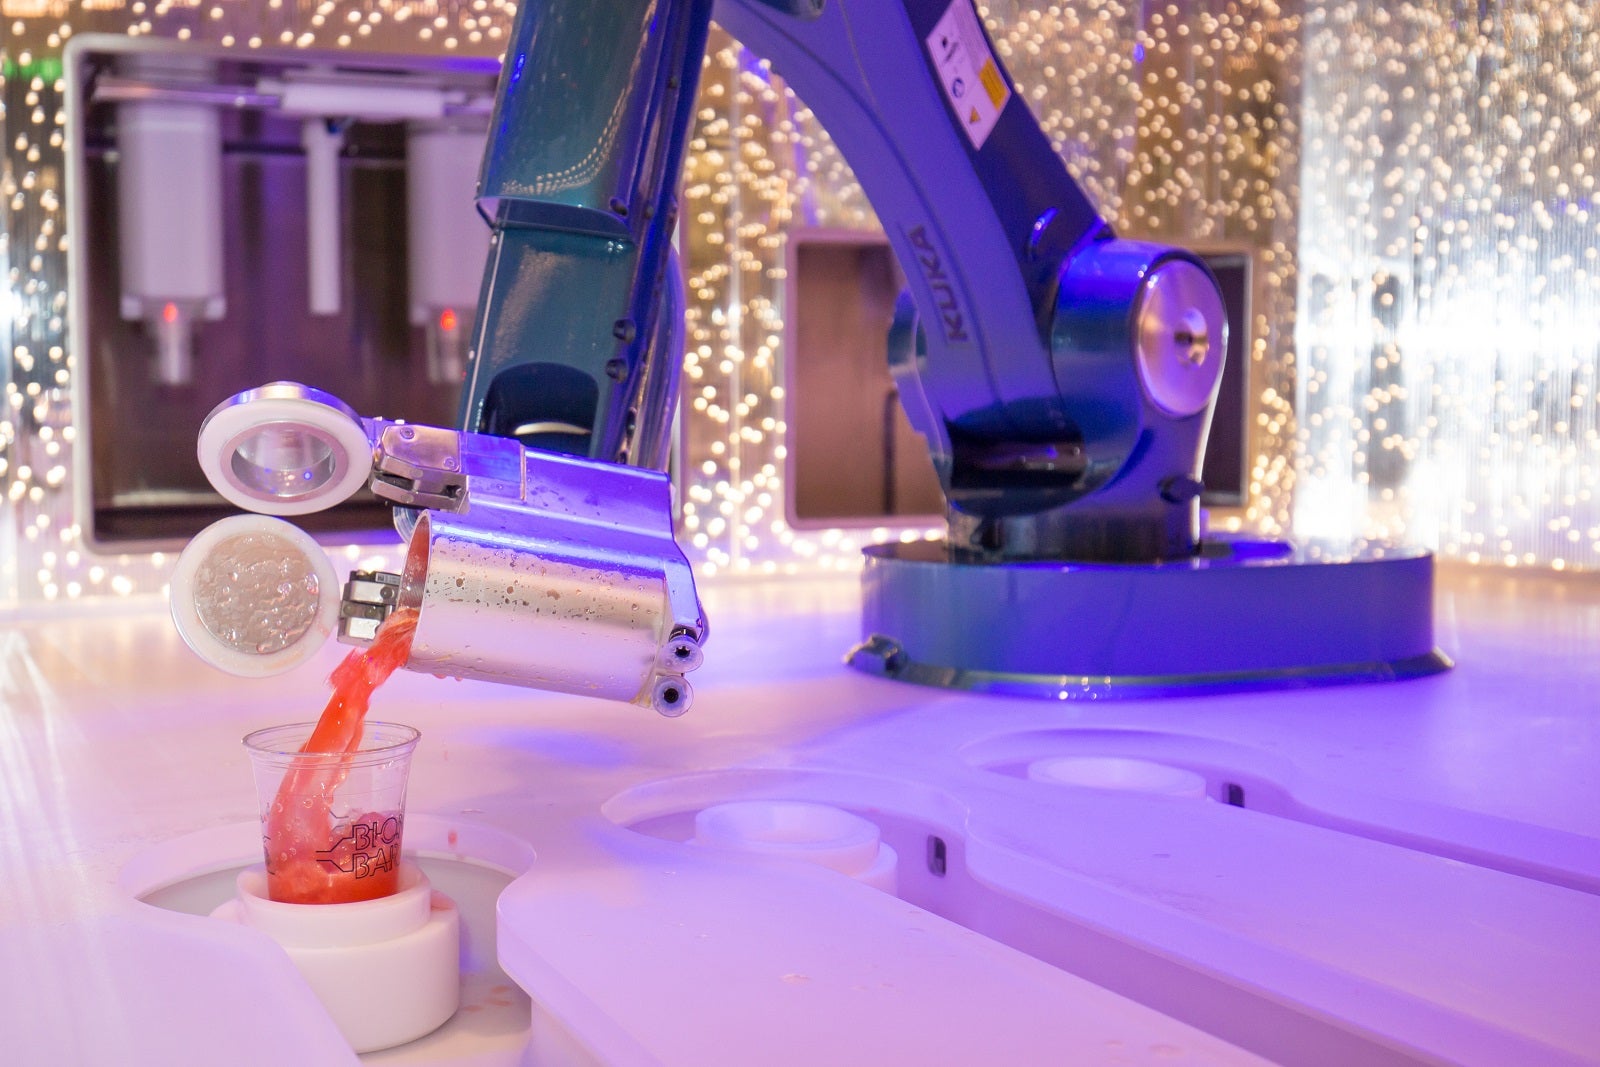 One of the Bionic Bar's robotic arms pours a drink on Harmony of the Seas